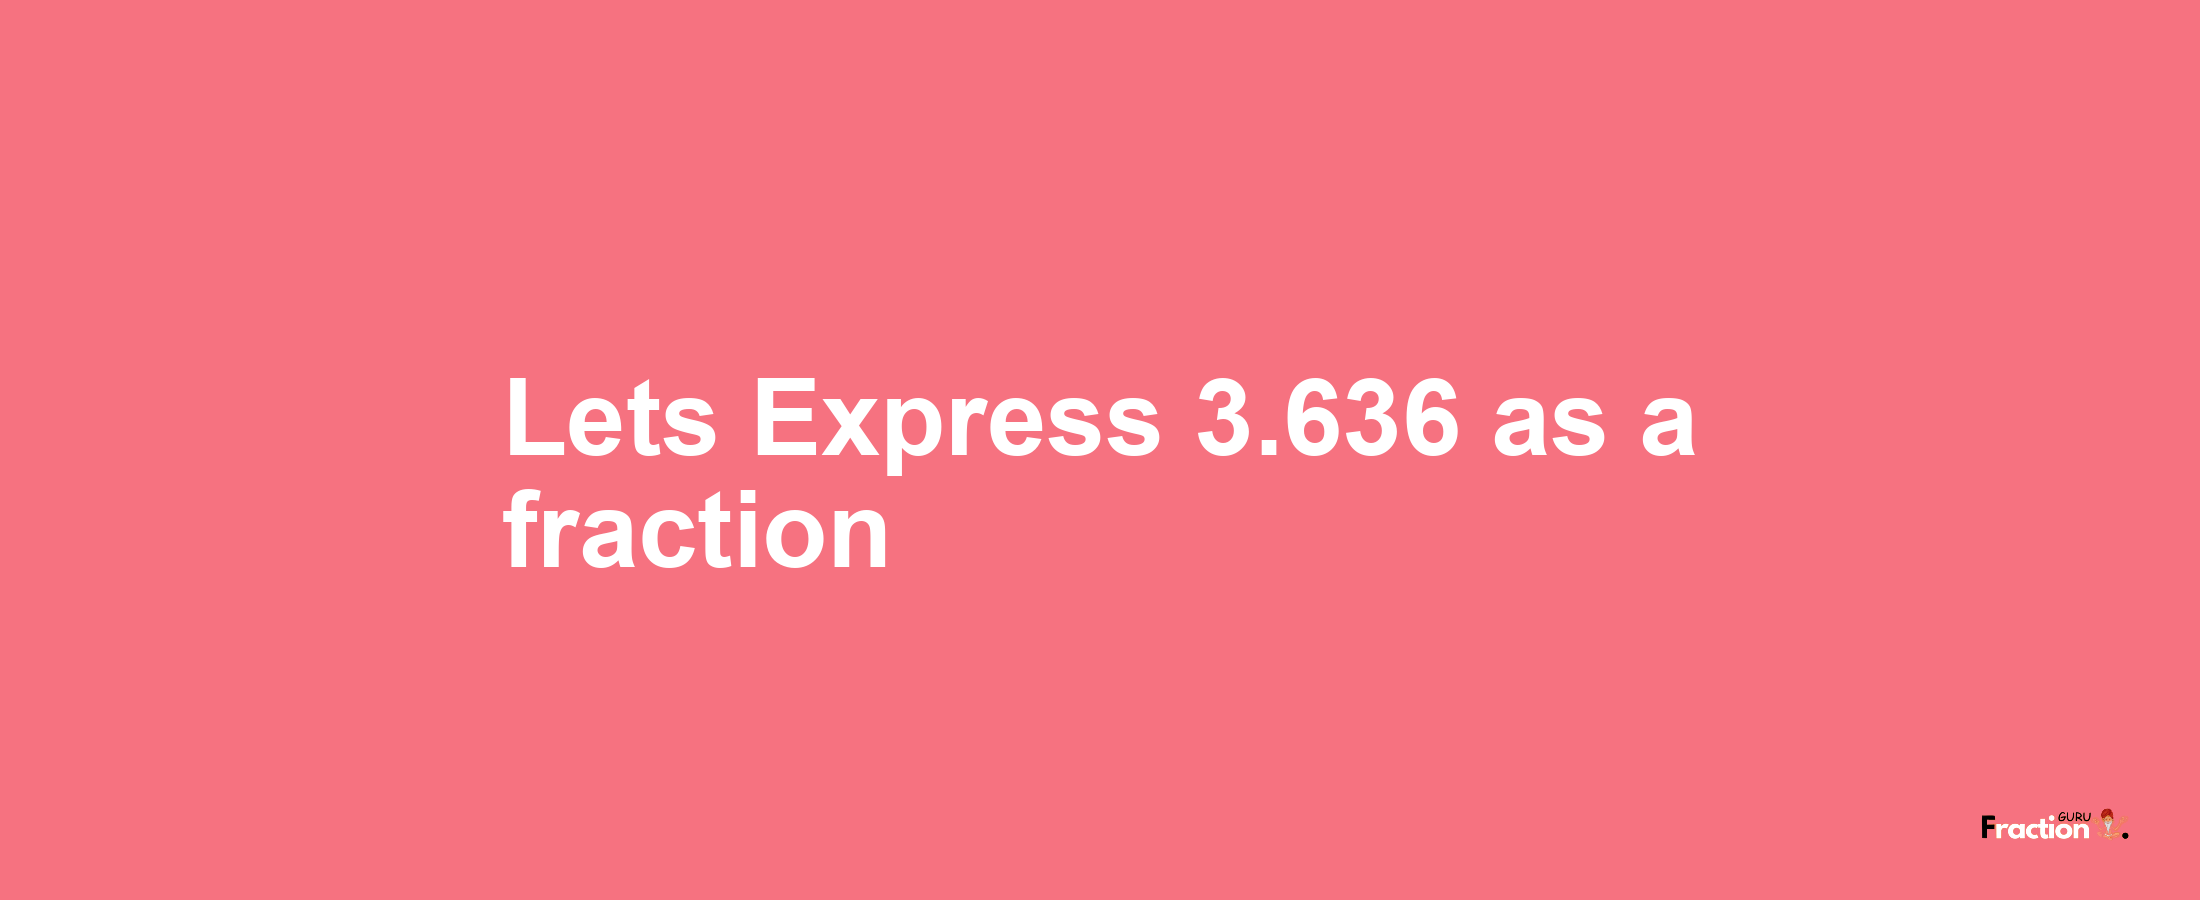 Lets Express 3.636 as afraction